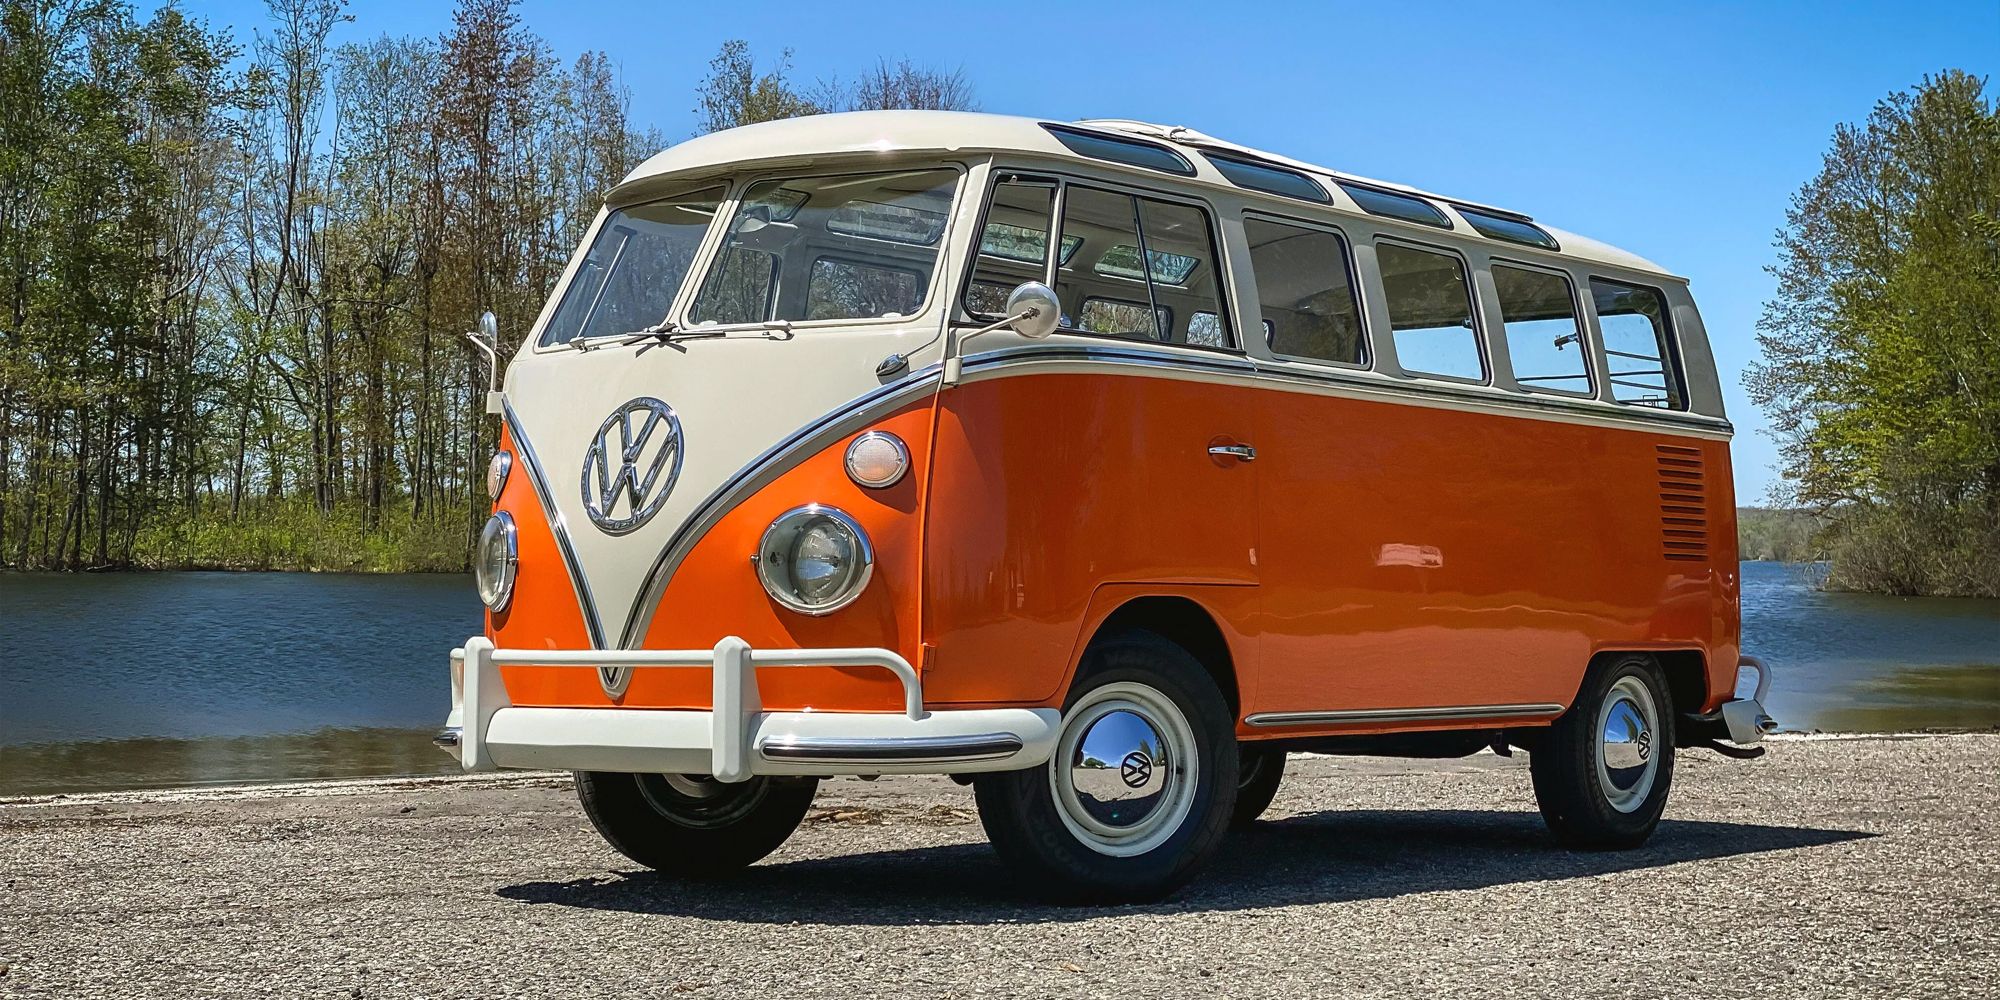 A VW Bus in two-tone orange and white